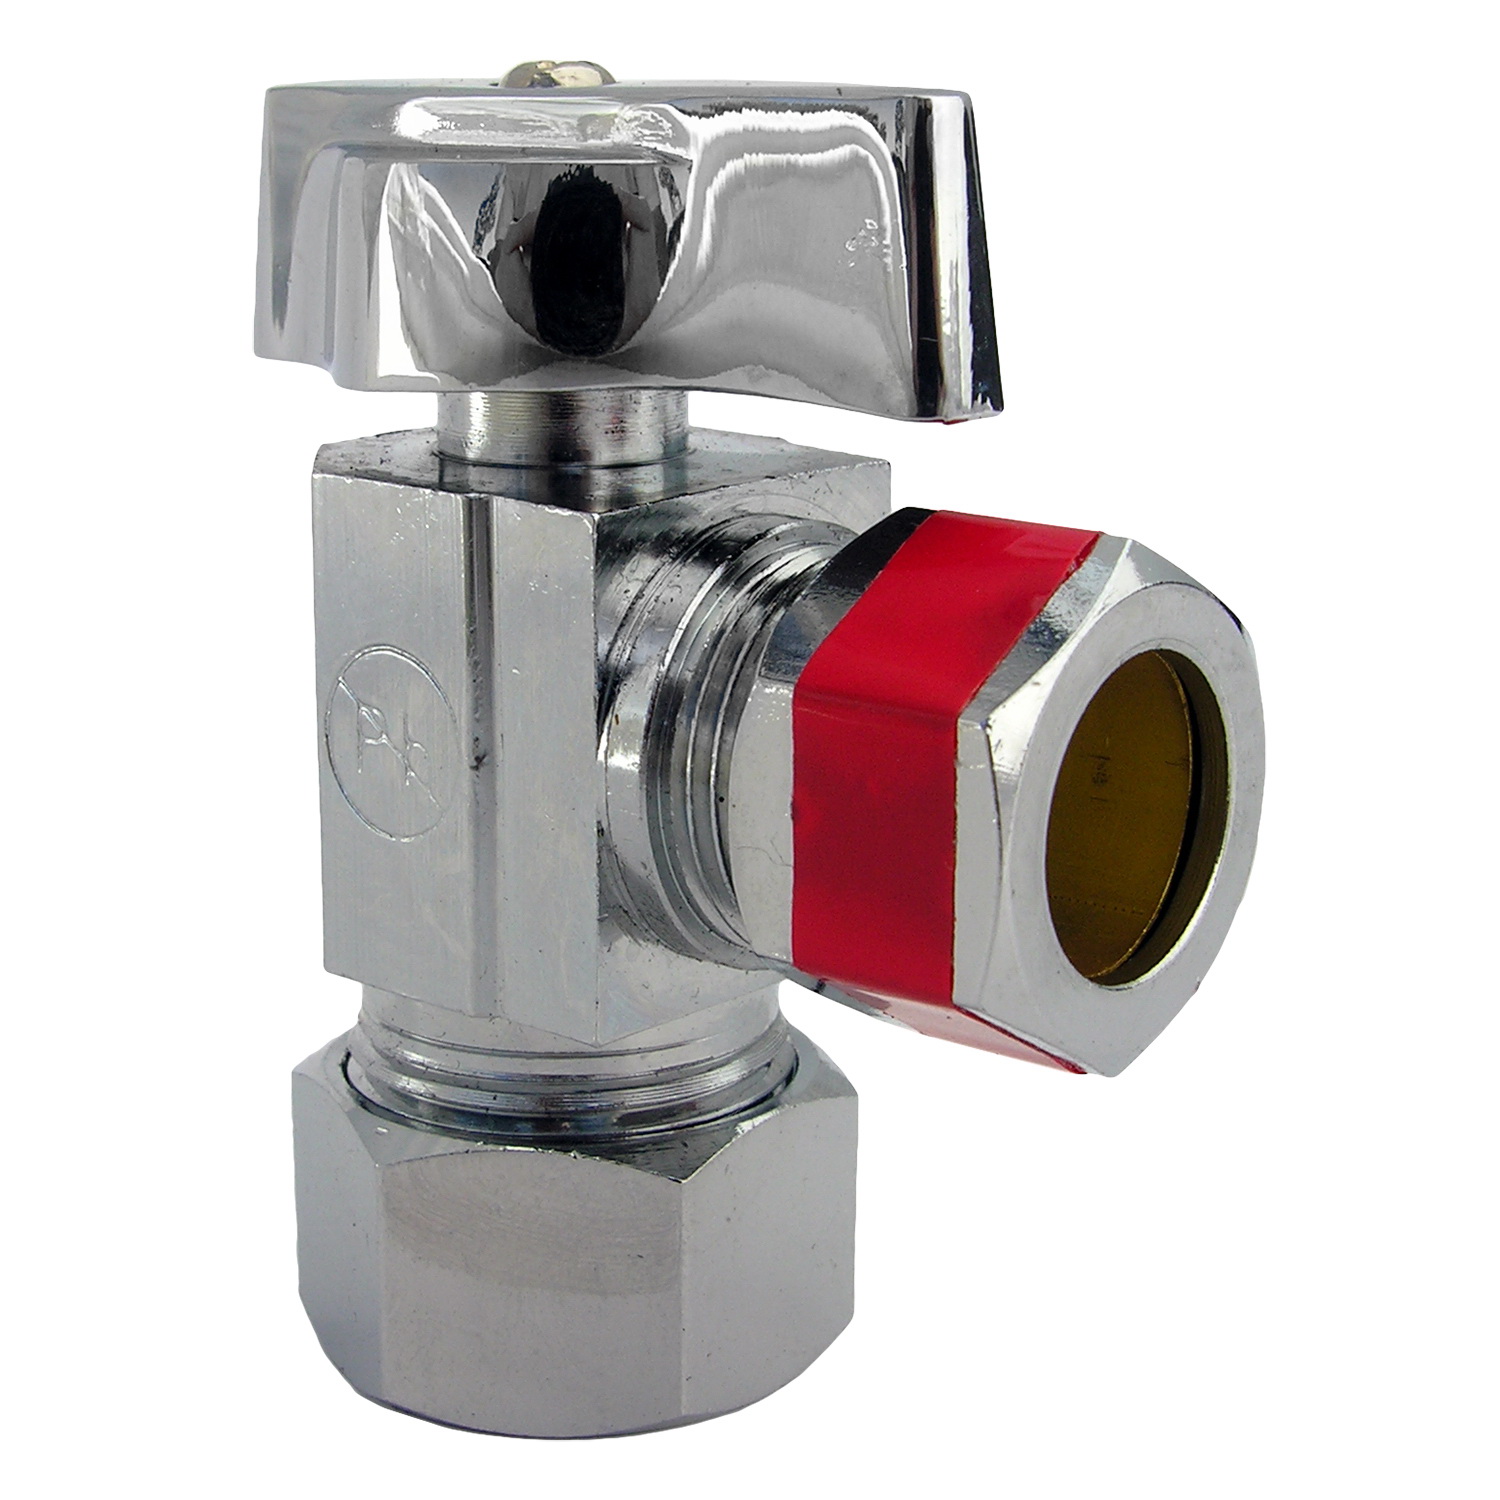 Lasco 06-9213 Angle Stop Valve, 5/8 x 1/2 in Connection, Compression x Compression, Brass Body